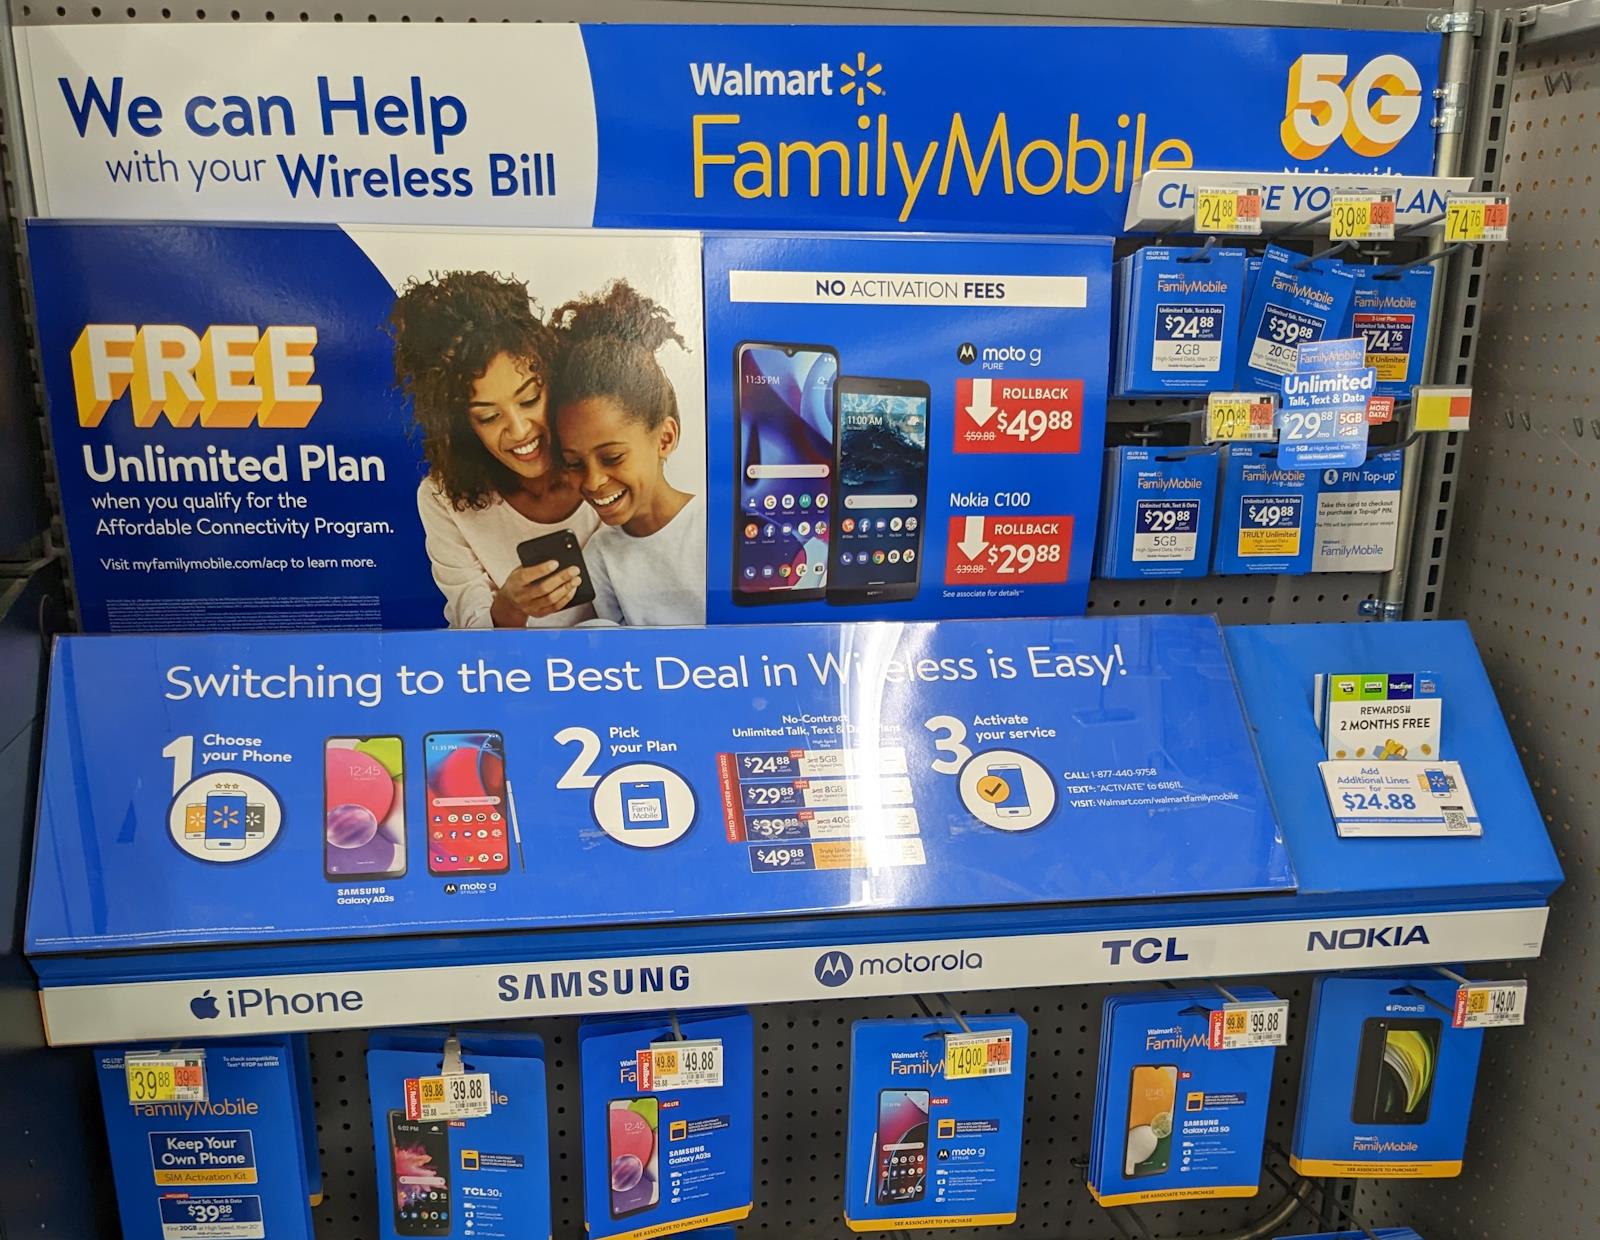 Walmart Family Mobile On Display At A Walmart Local To BestMVNO